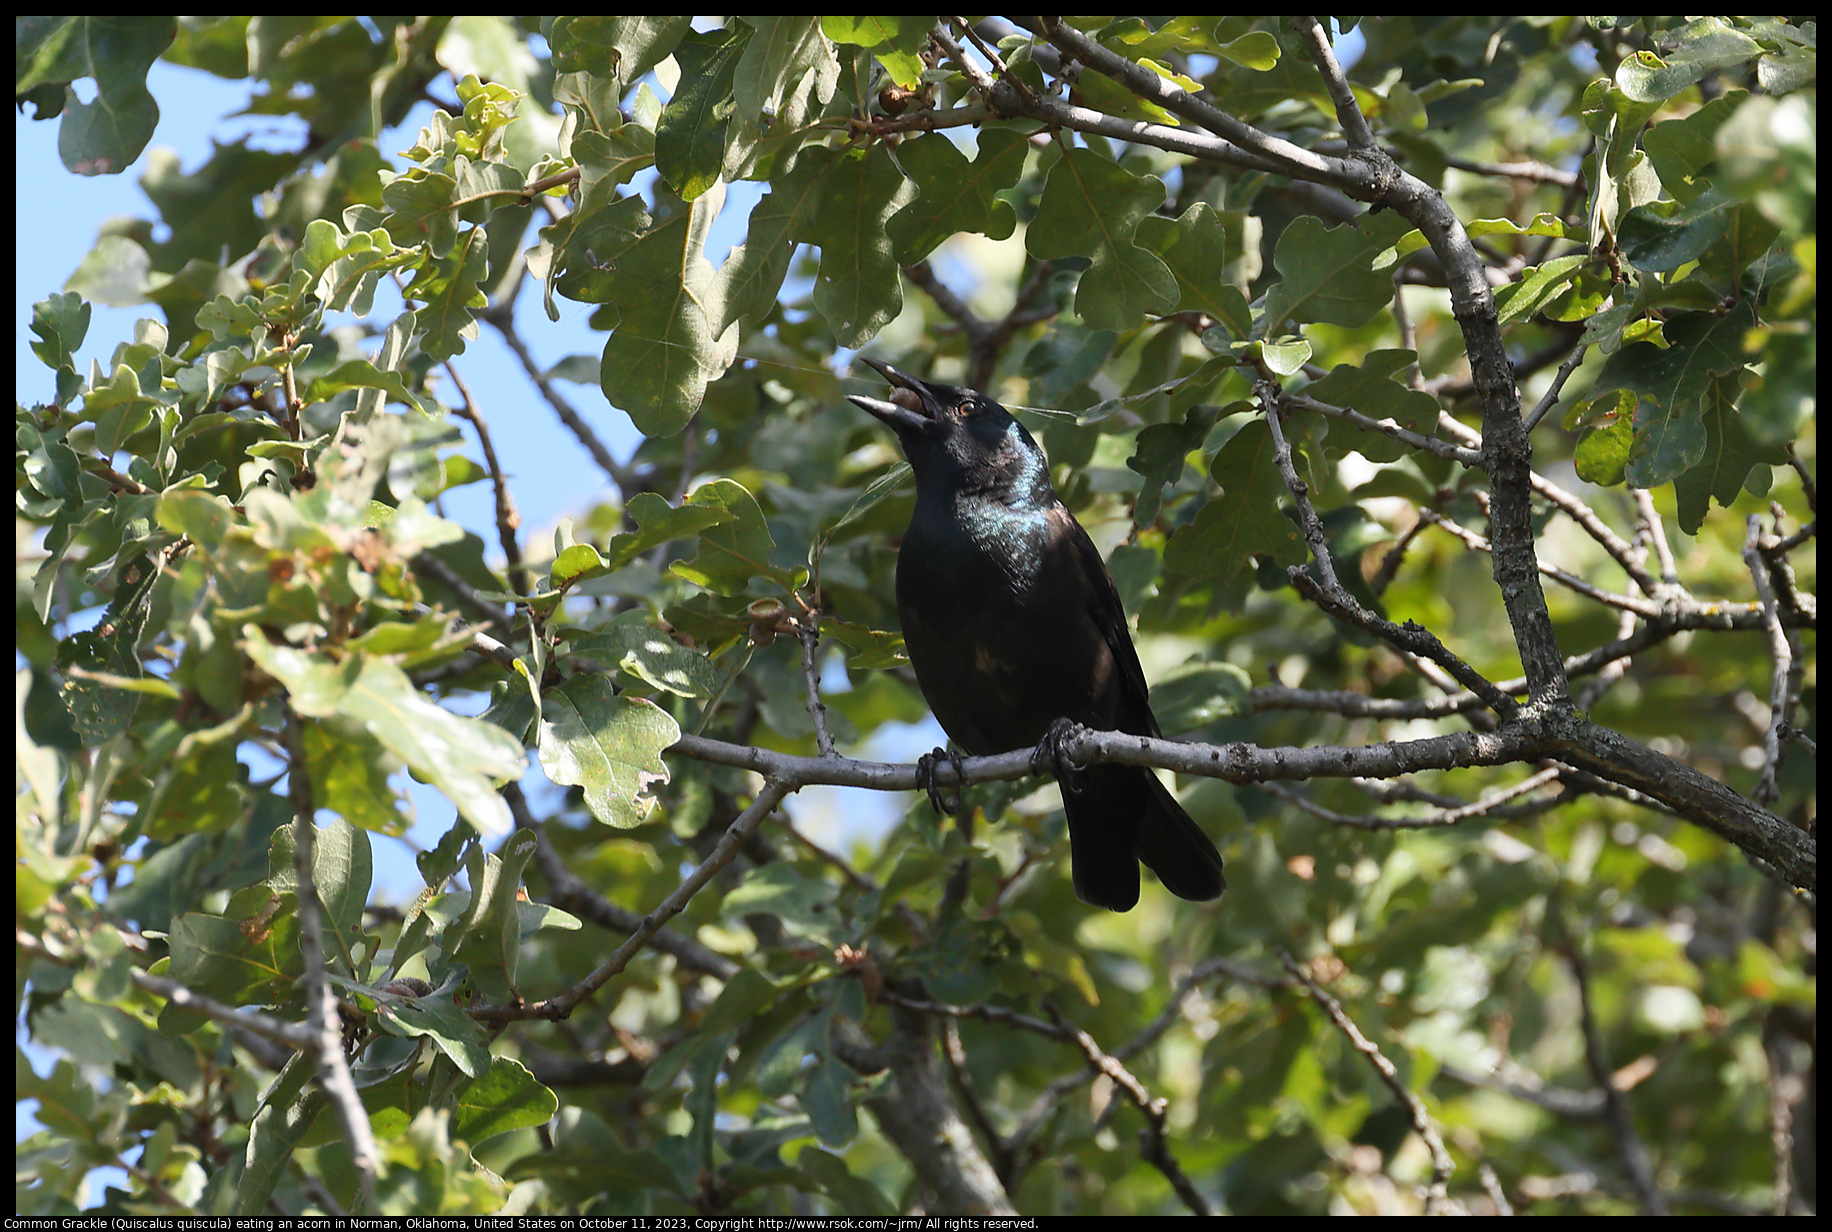 Common Grackle (Quiscalus quiscula) eating an acorn in Norman, Oklahoma, United States, on October 11, 2023